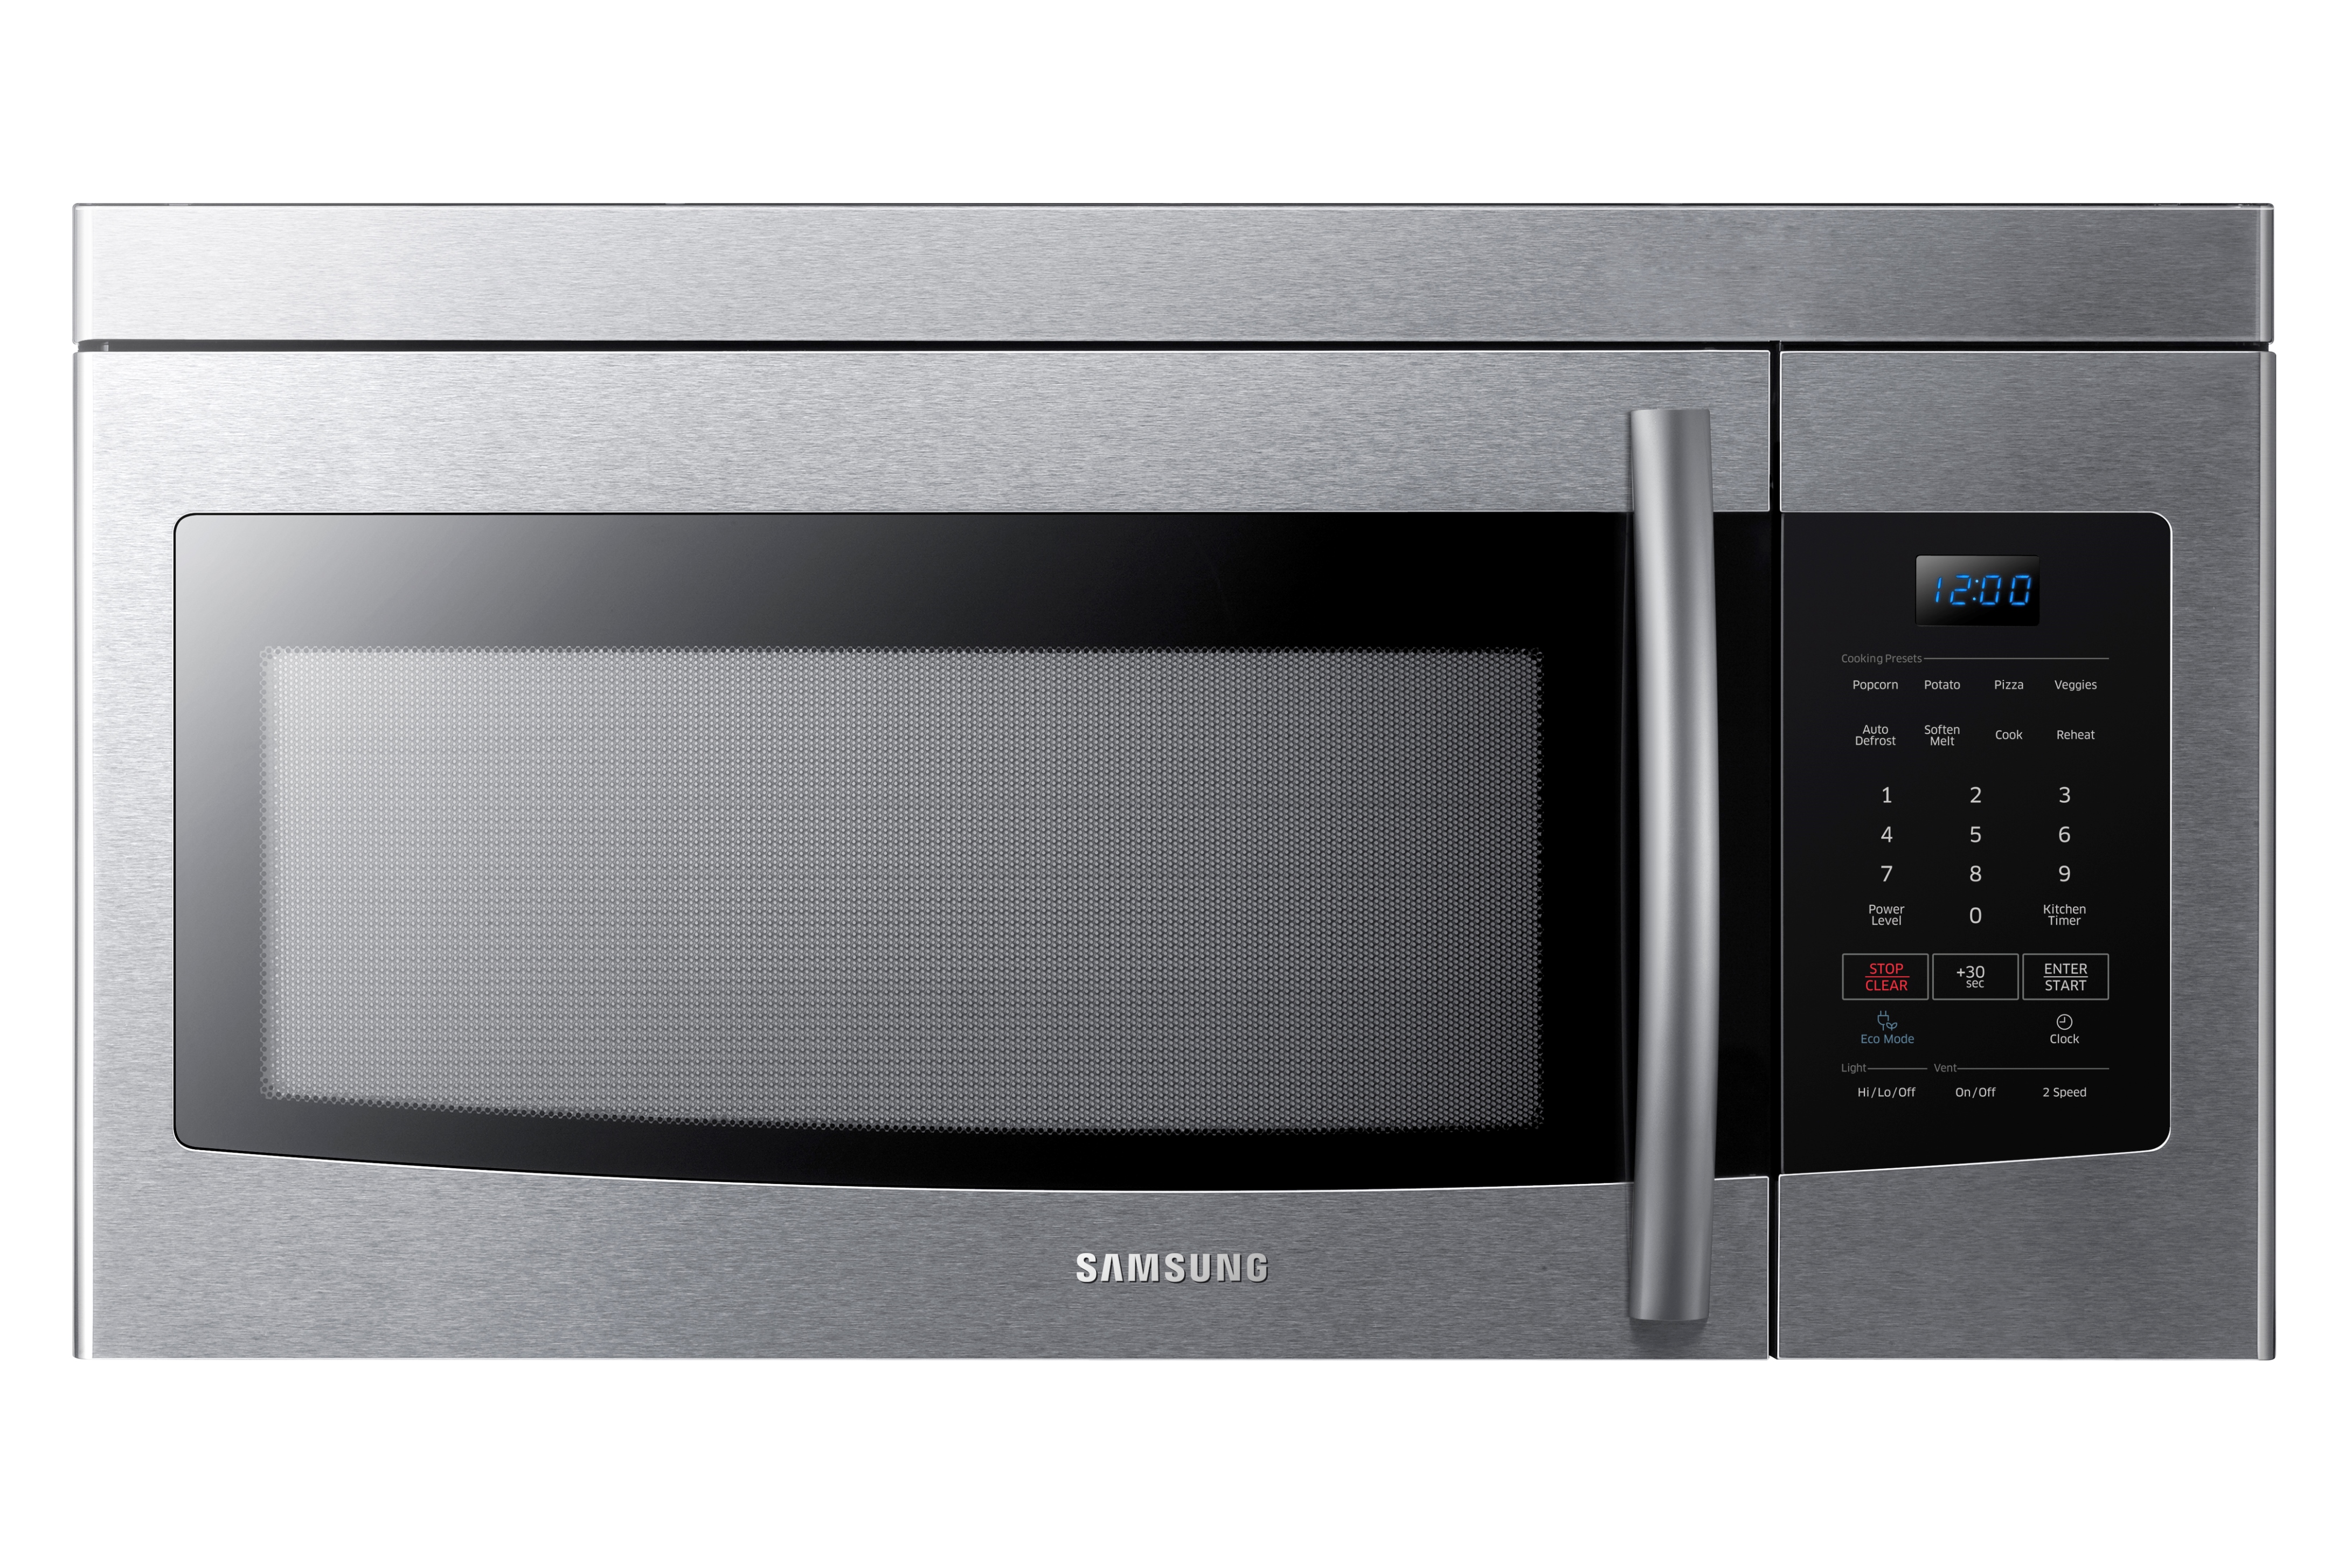 Samsung ME16K3000AS/AA 1.6 cu.ft. Over The Range Microwave Stainless Steel